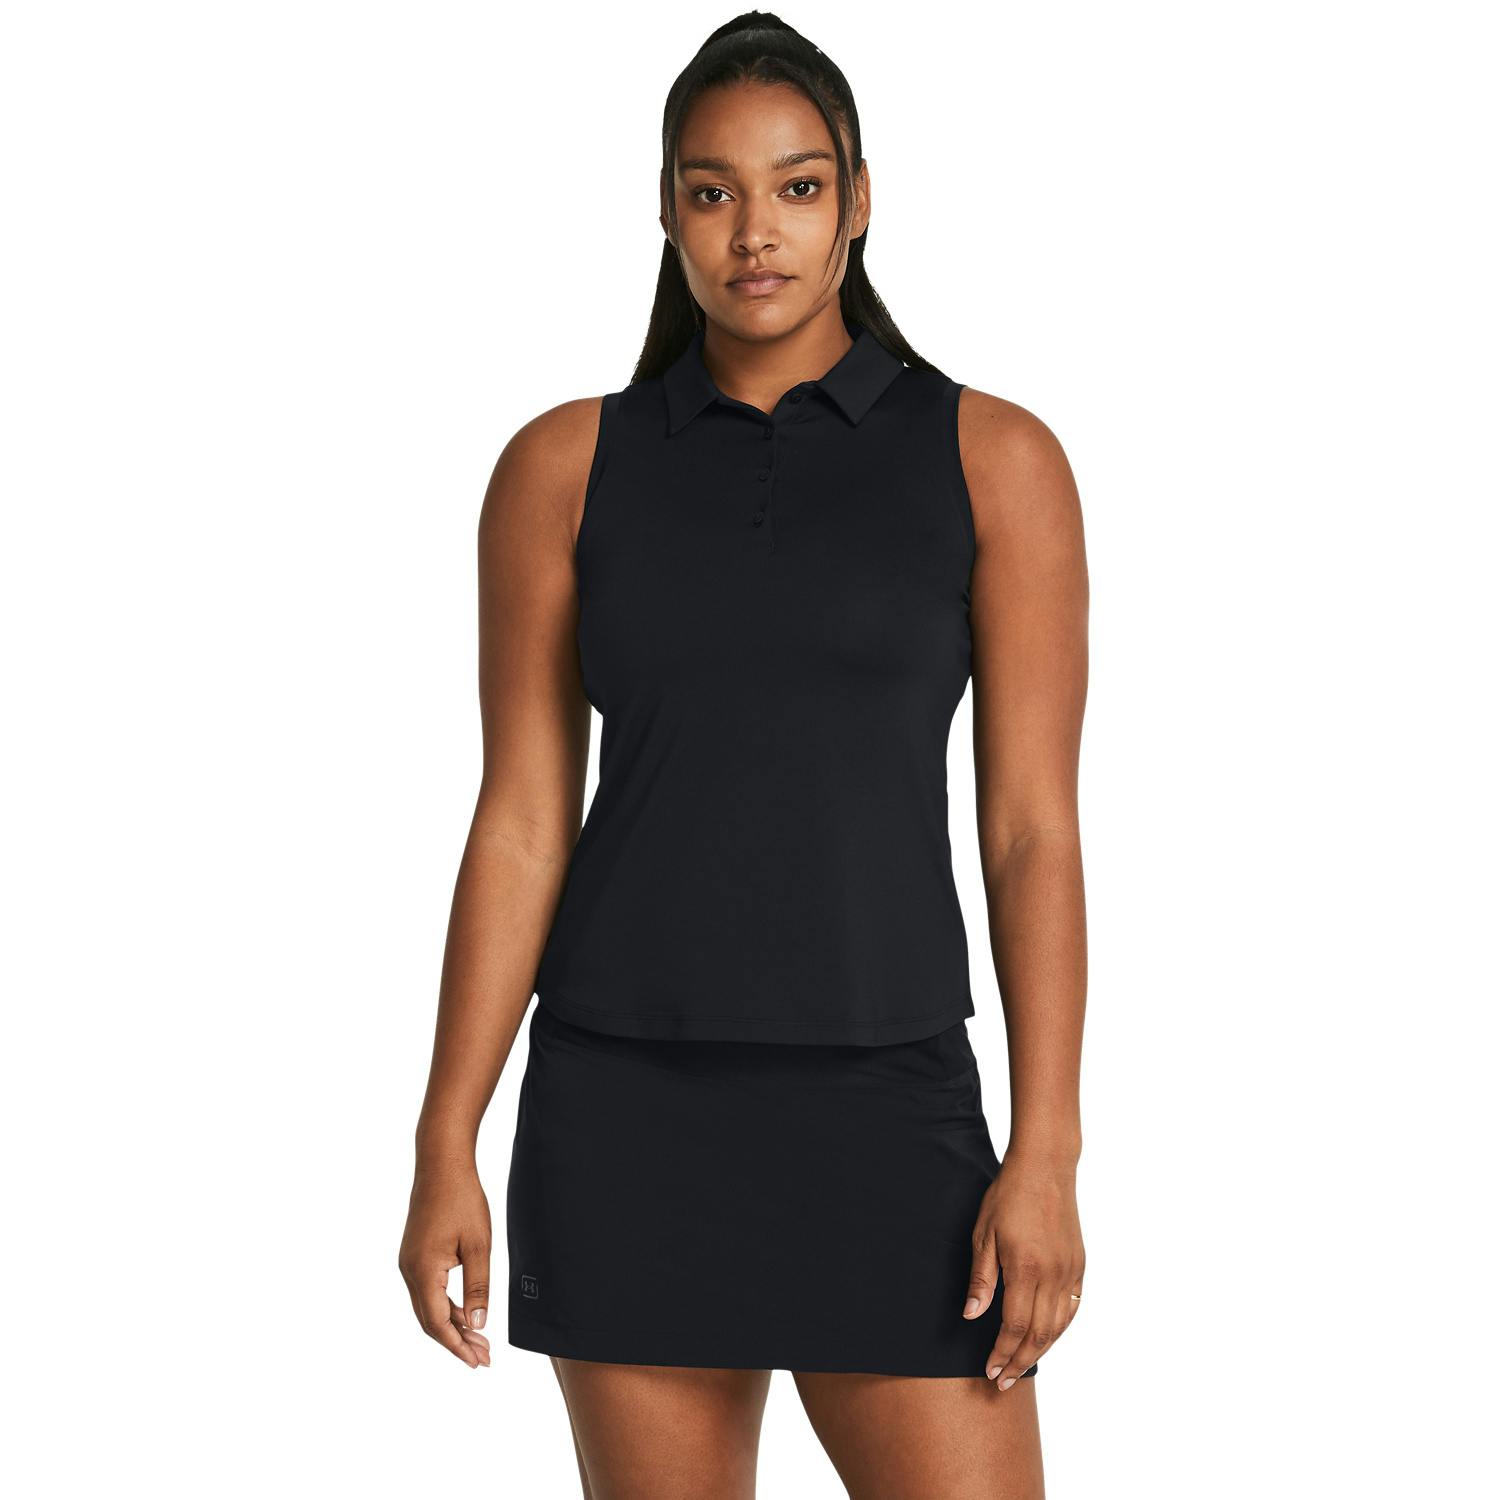 Under Armour Womens Playoff SL Polo